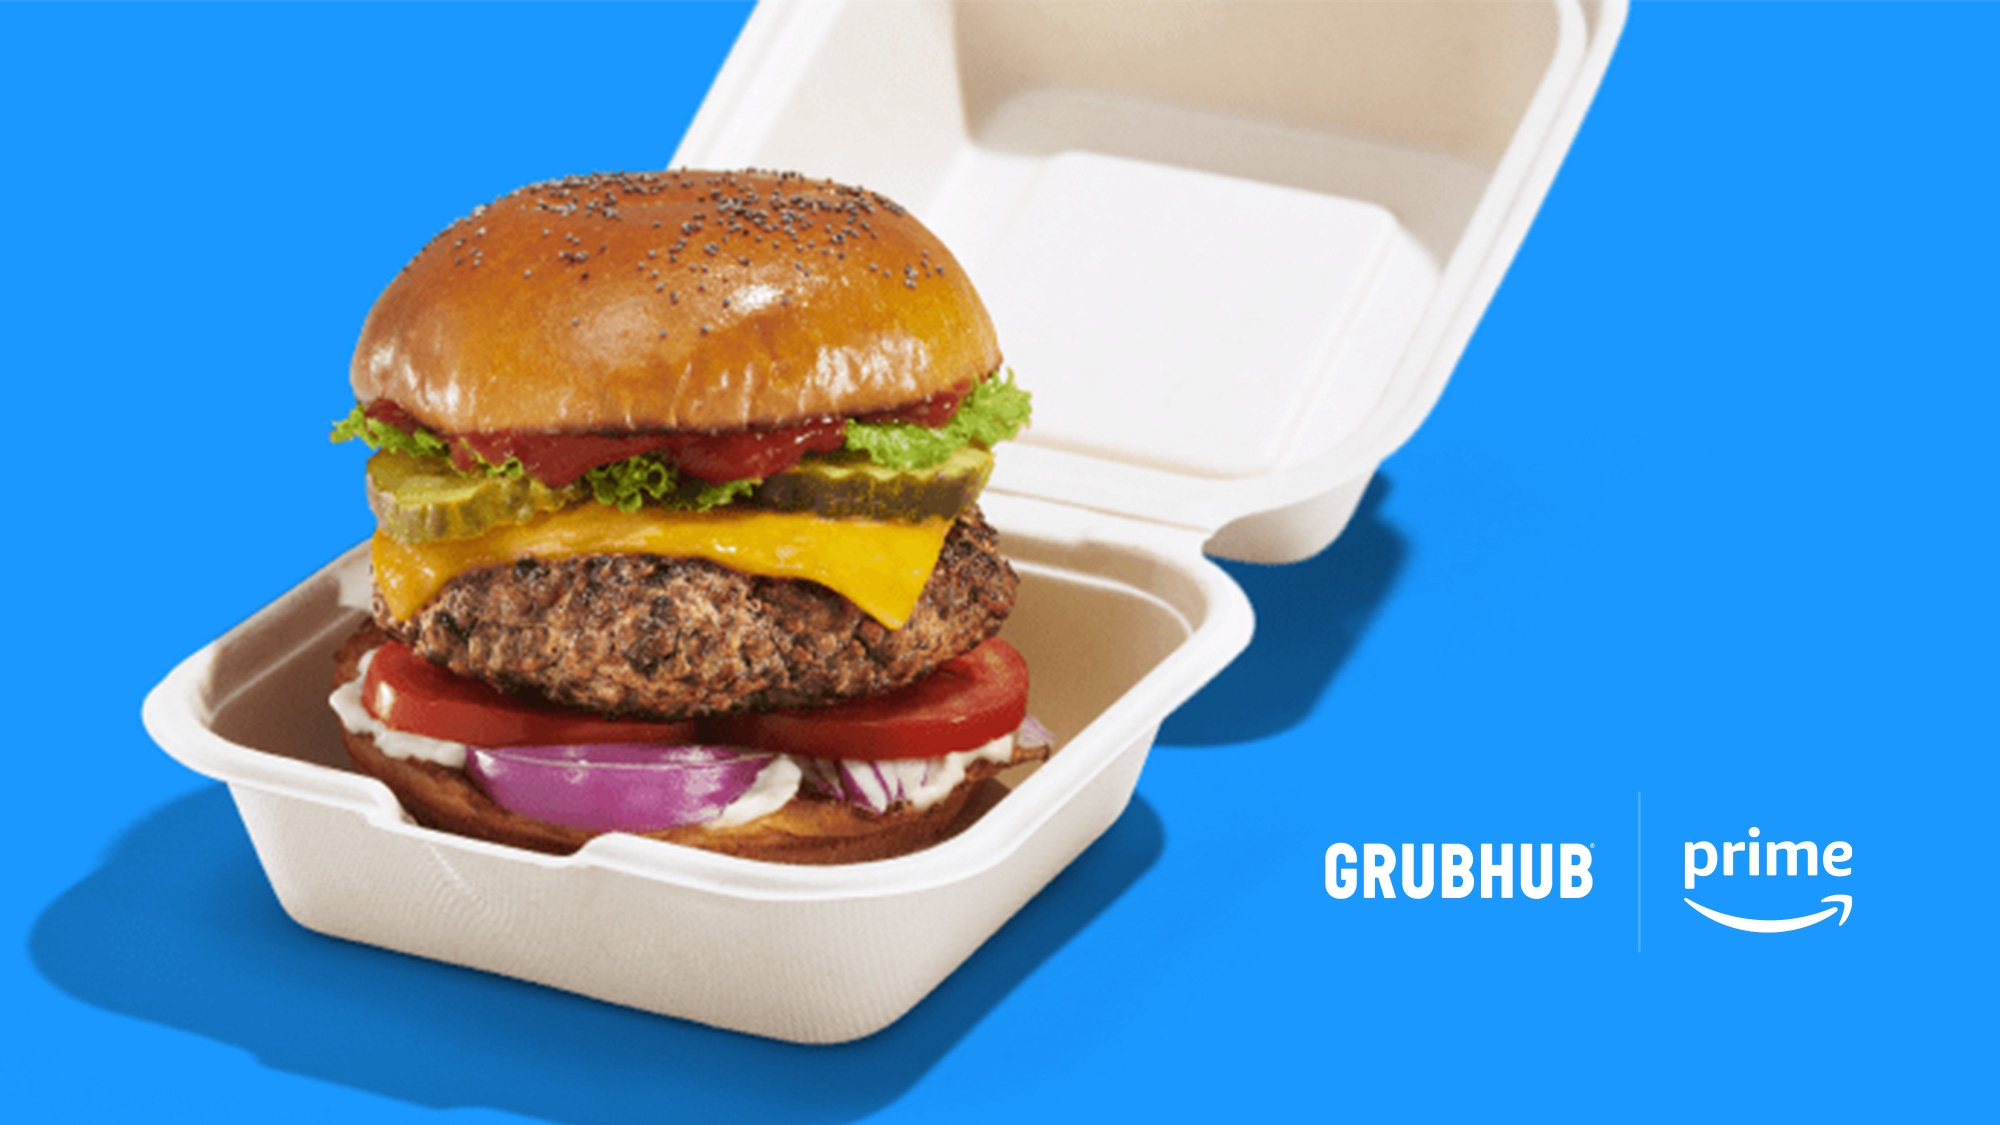 An image of a burger inside a takeaway box. There is a blue background and the Amazon and Grubhub logos on the image.